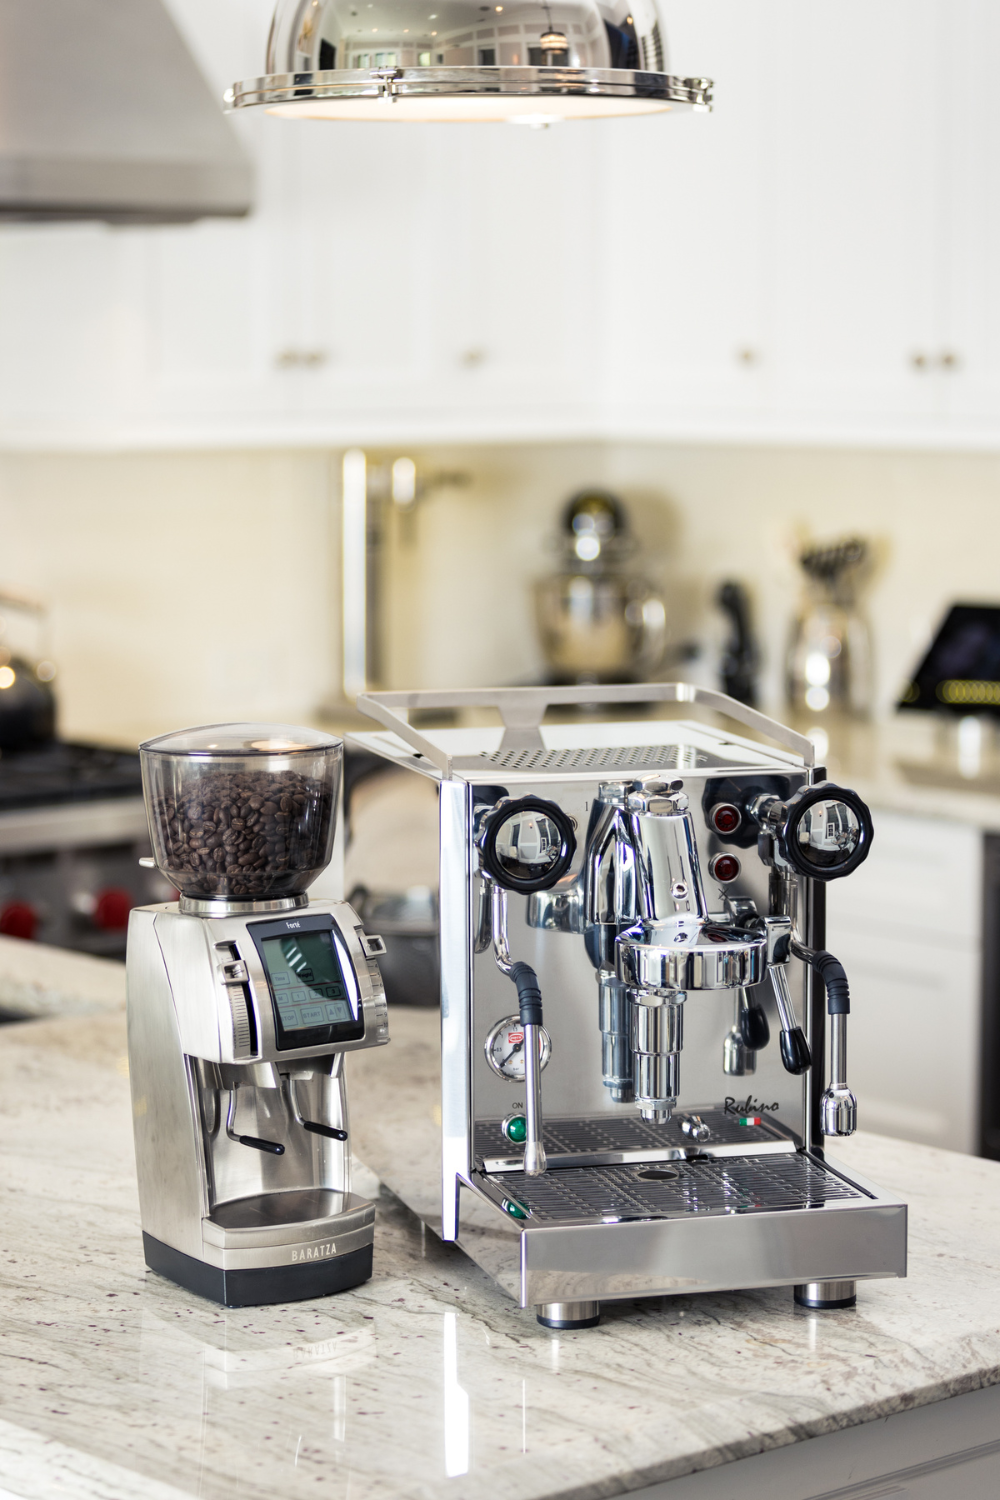 Espresso Machine Brands: A List Featuring Grinders and Accessories